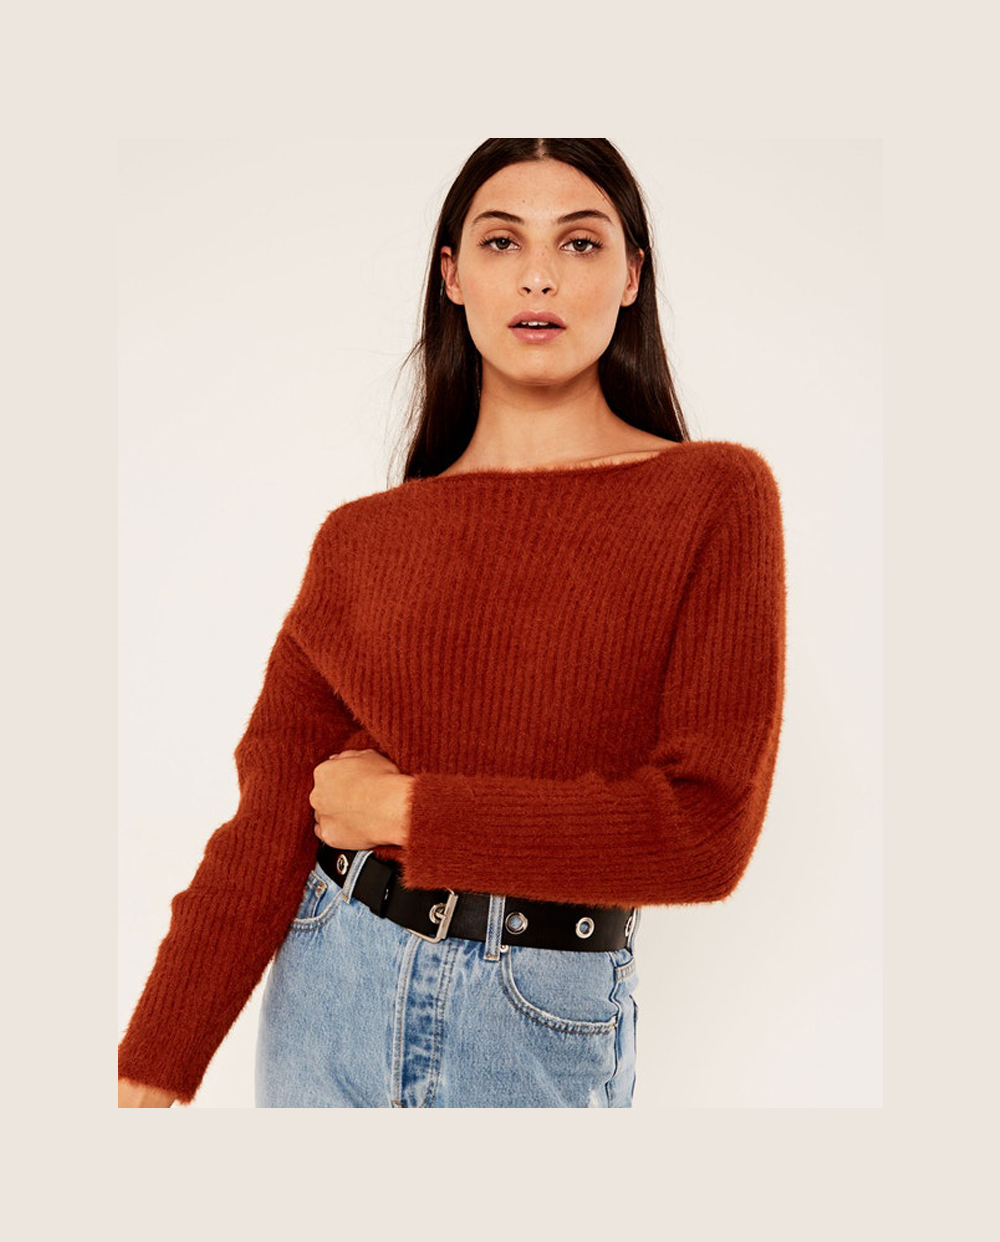 30+ Items We Can't Believe Are On Sale Right Now And We're #AddingToCart | Fluffy Knit Jumper, $35 (was $49.99) from Glassons